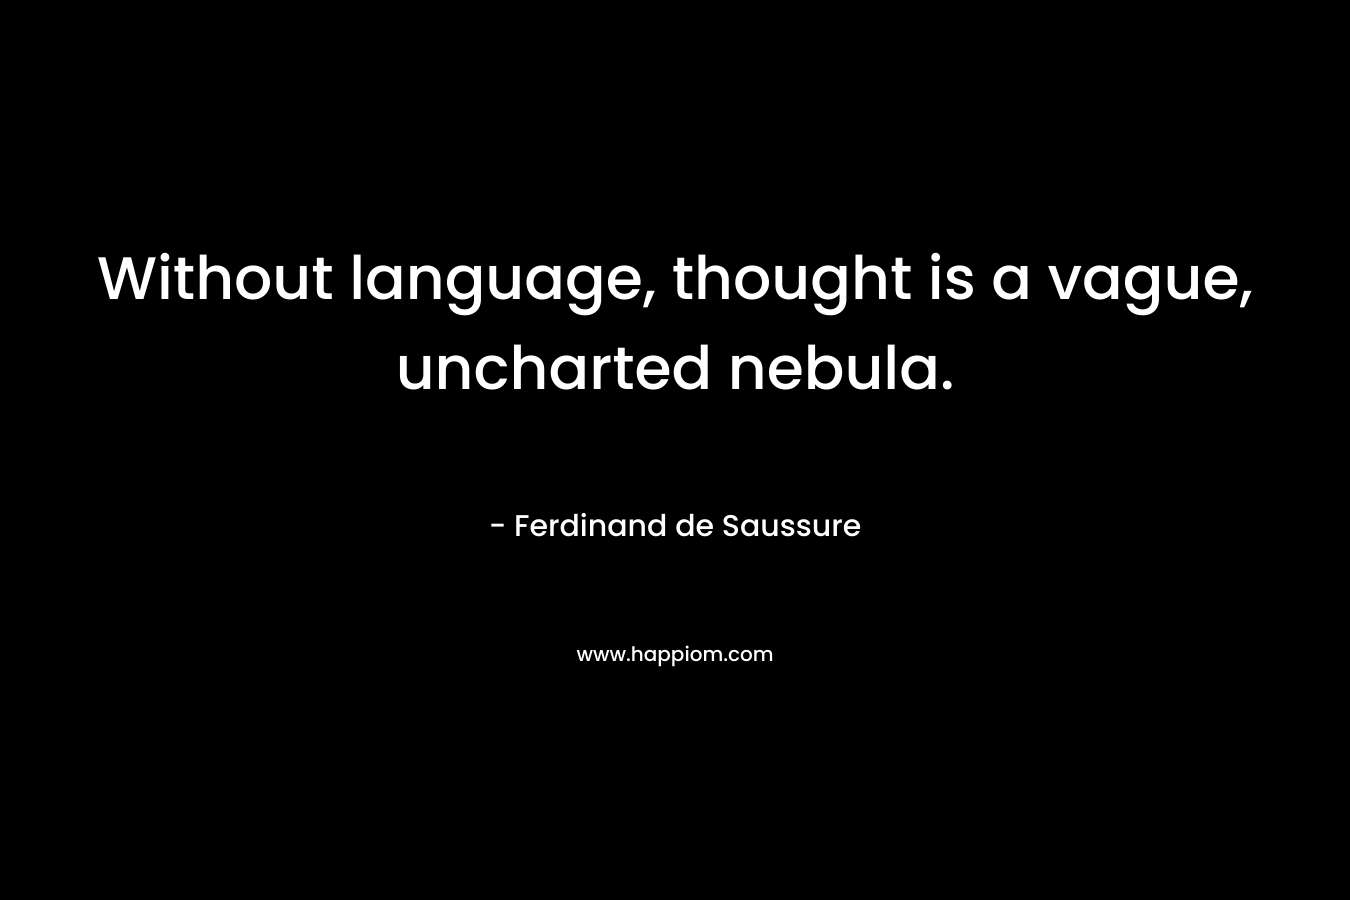 Without language, thought is a vague, uncharted nebula.